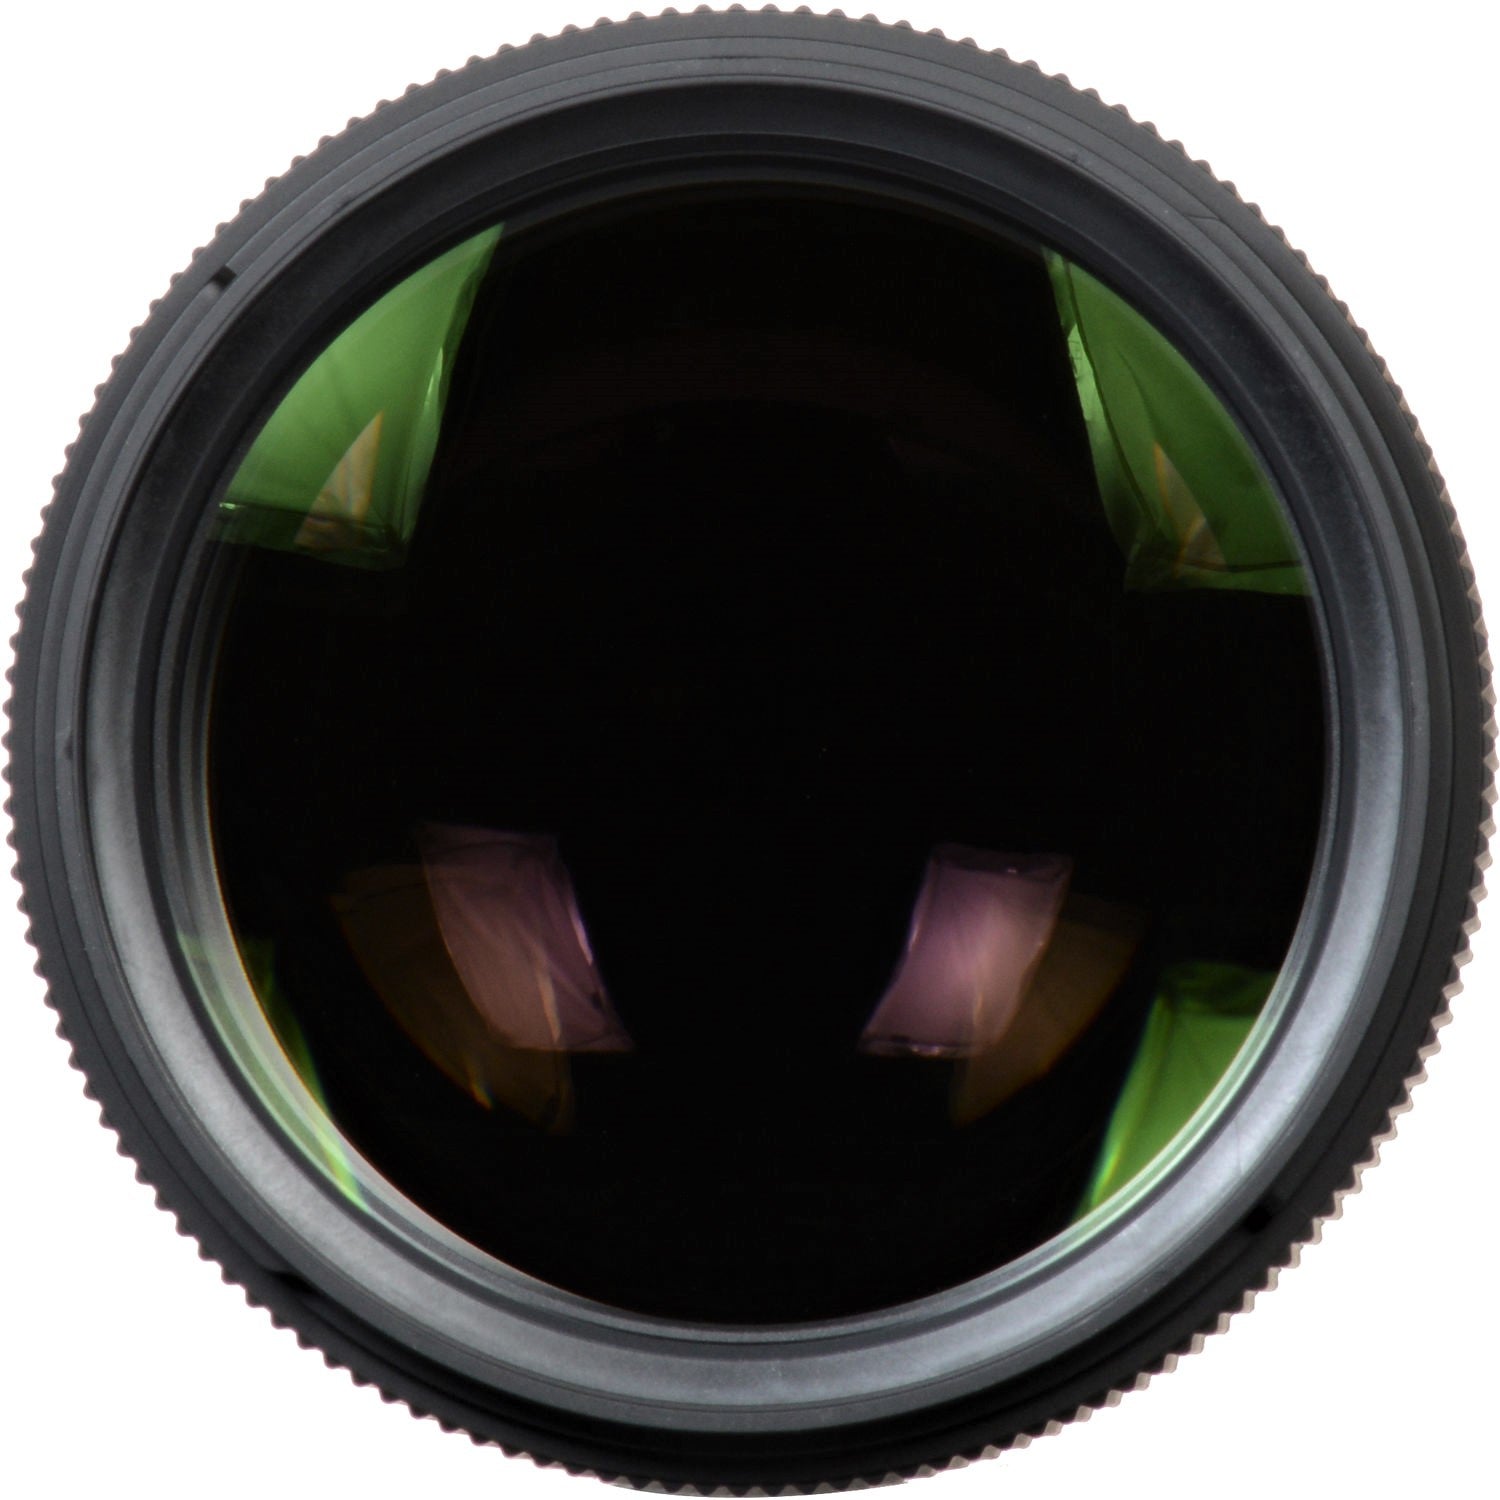 Sigma 135mm F1.8 DG HSM Art Lens for Sony E in a Front Close-Up View